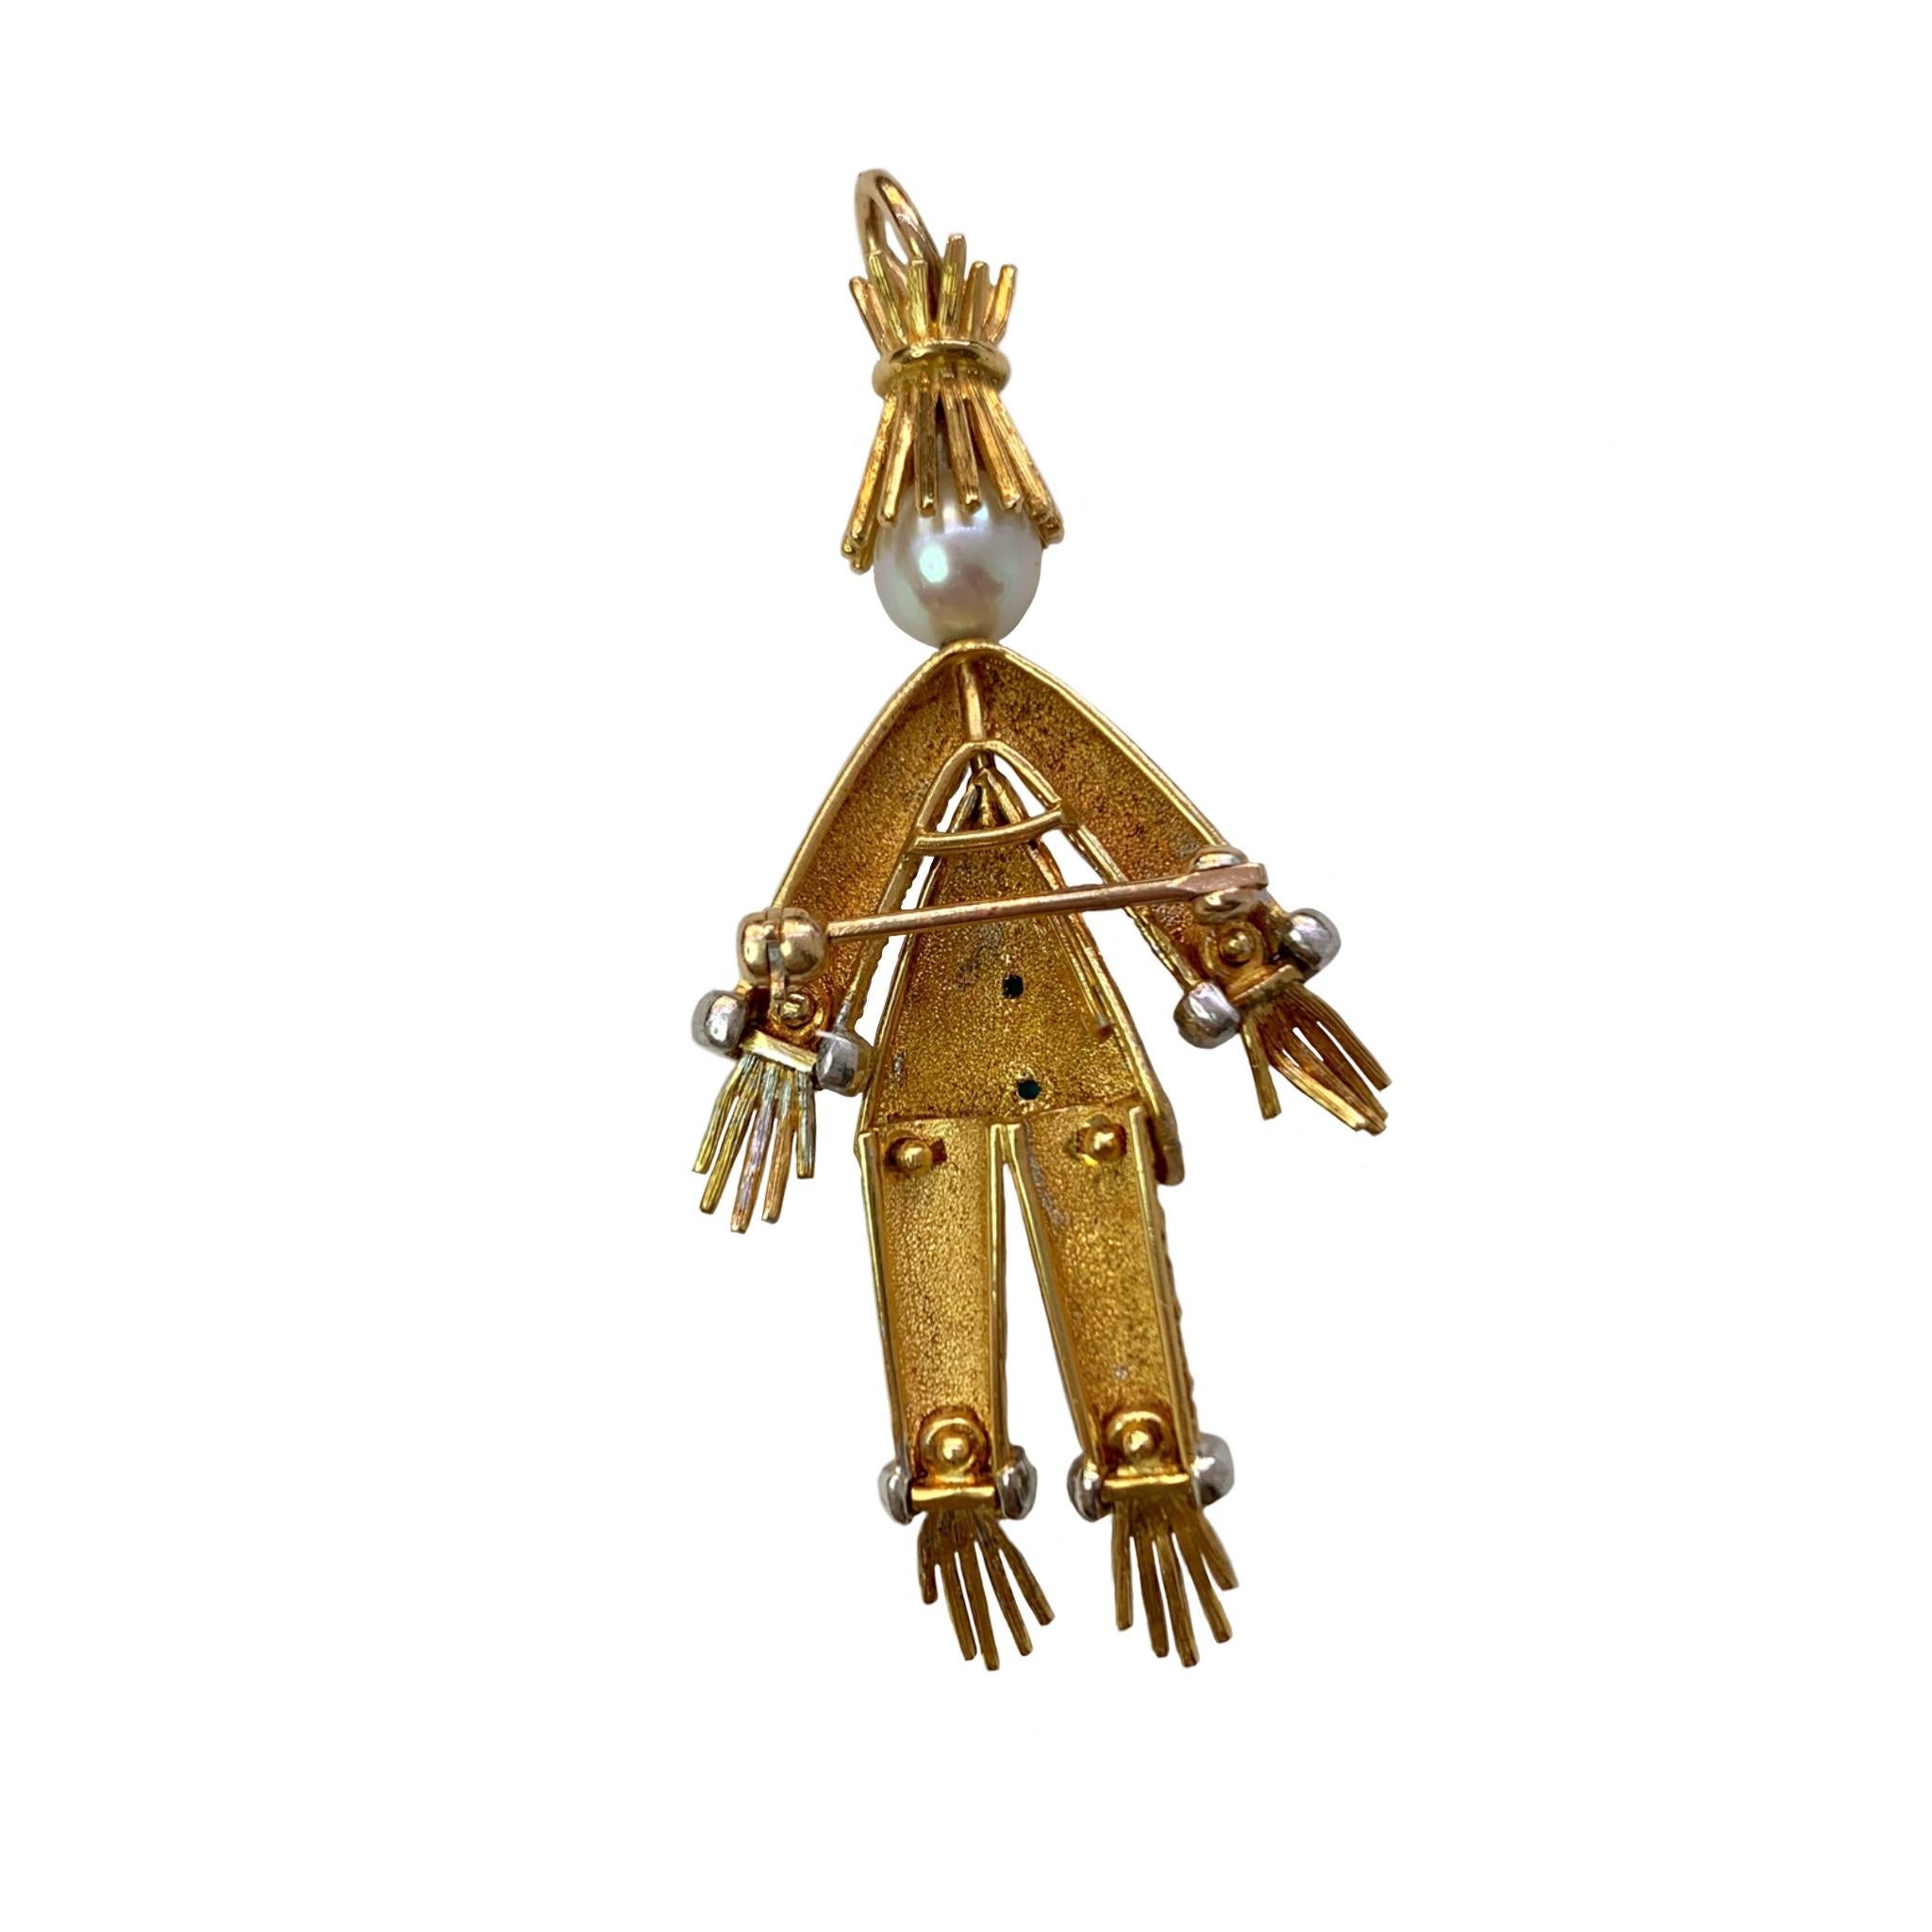 Rudi Cherny designed 18 Karat yellow gold scarecrow pin/pendant embellished by a 6mm cultured pearl head and accented with two 1mm turquoise and 20 single cut diamonds on the wrists and ankles with a total weight of approximately 0.10cts. He is